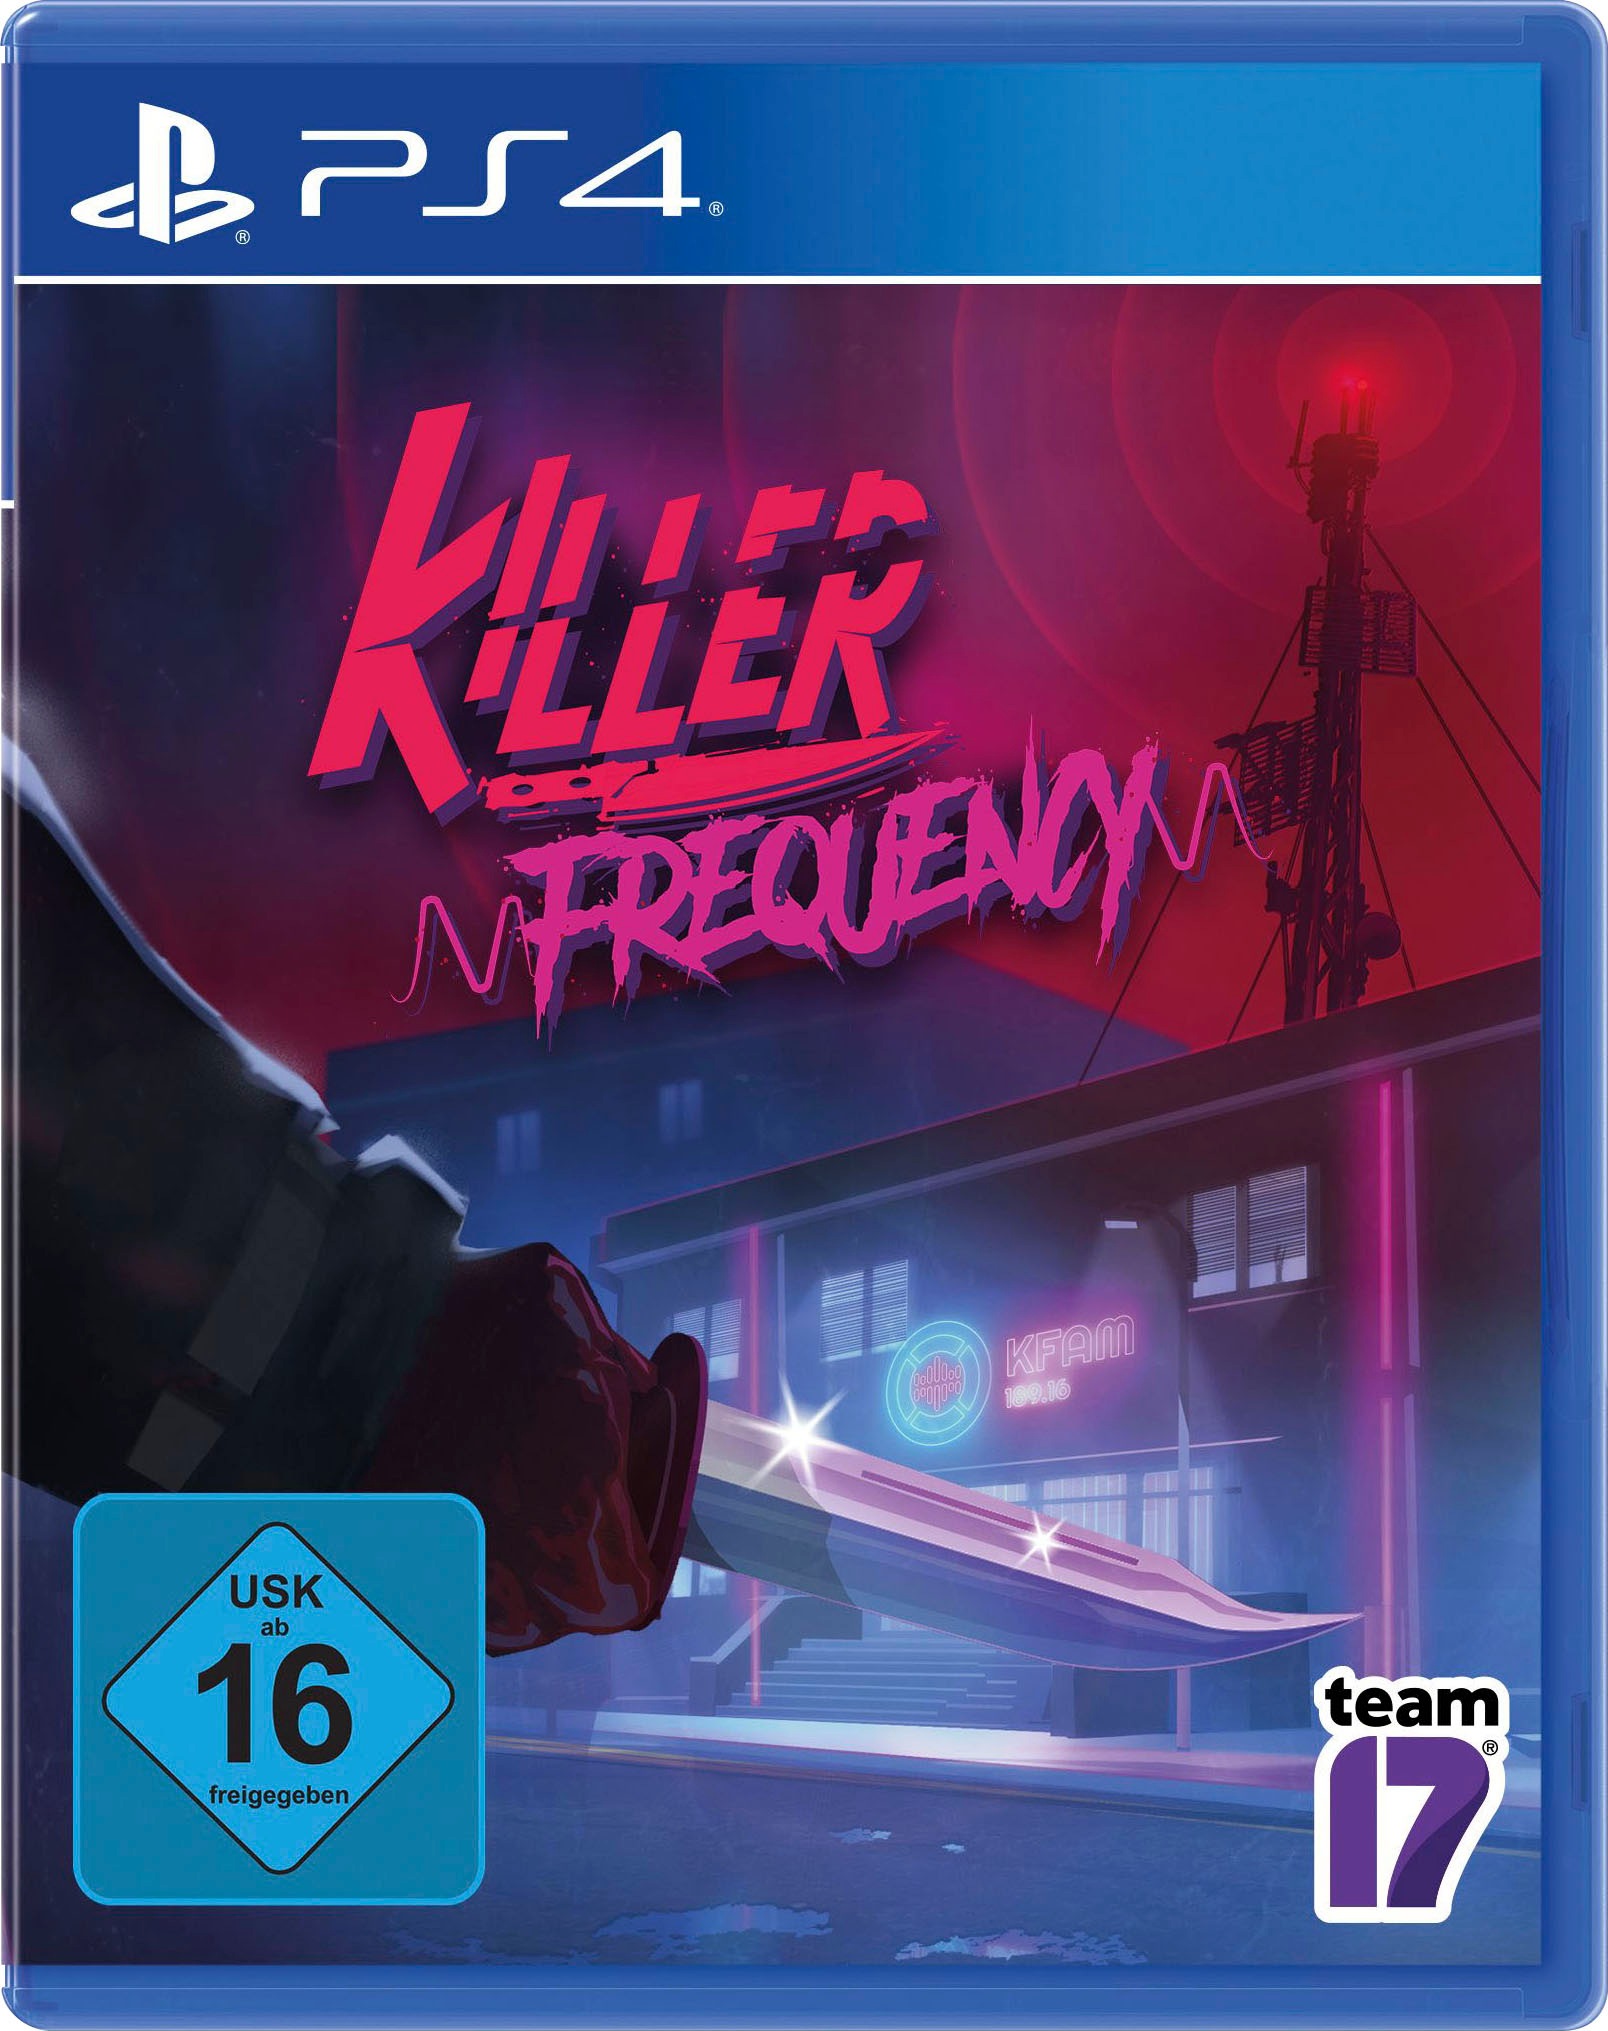 Spielesoftware »Killer Frequency«, PlayStation 4